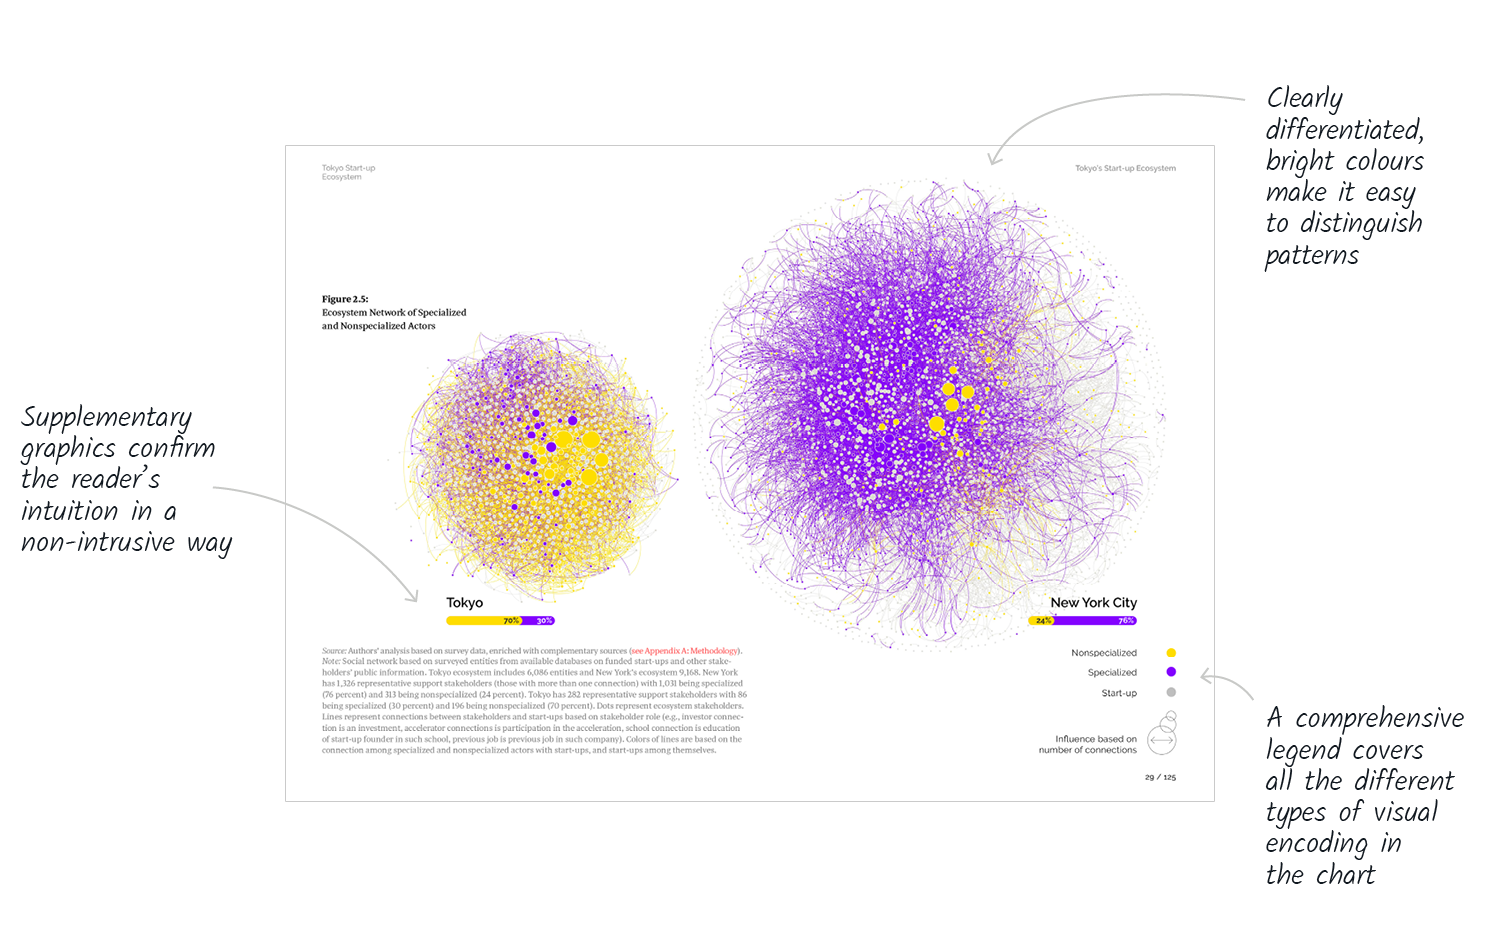 Page of the report where two network graphs are displayed in bright colours. The larger one represents New York and is clearly dominated by purple, the colour of specialist investors. It has only a few small touches of yellow, the colour of non-specialist investors. The other, smaller graph represents Tokyo and is dominated by yellow.